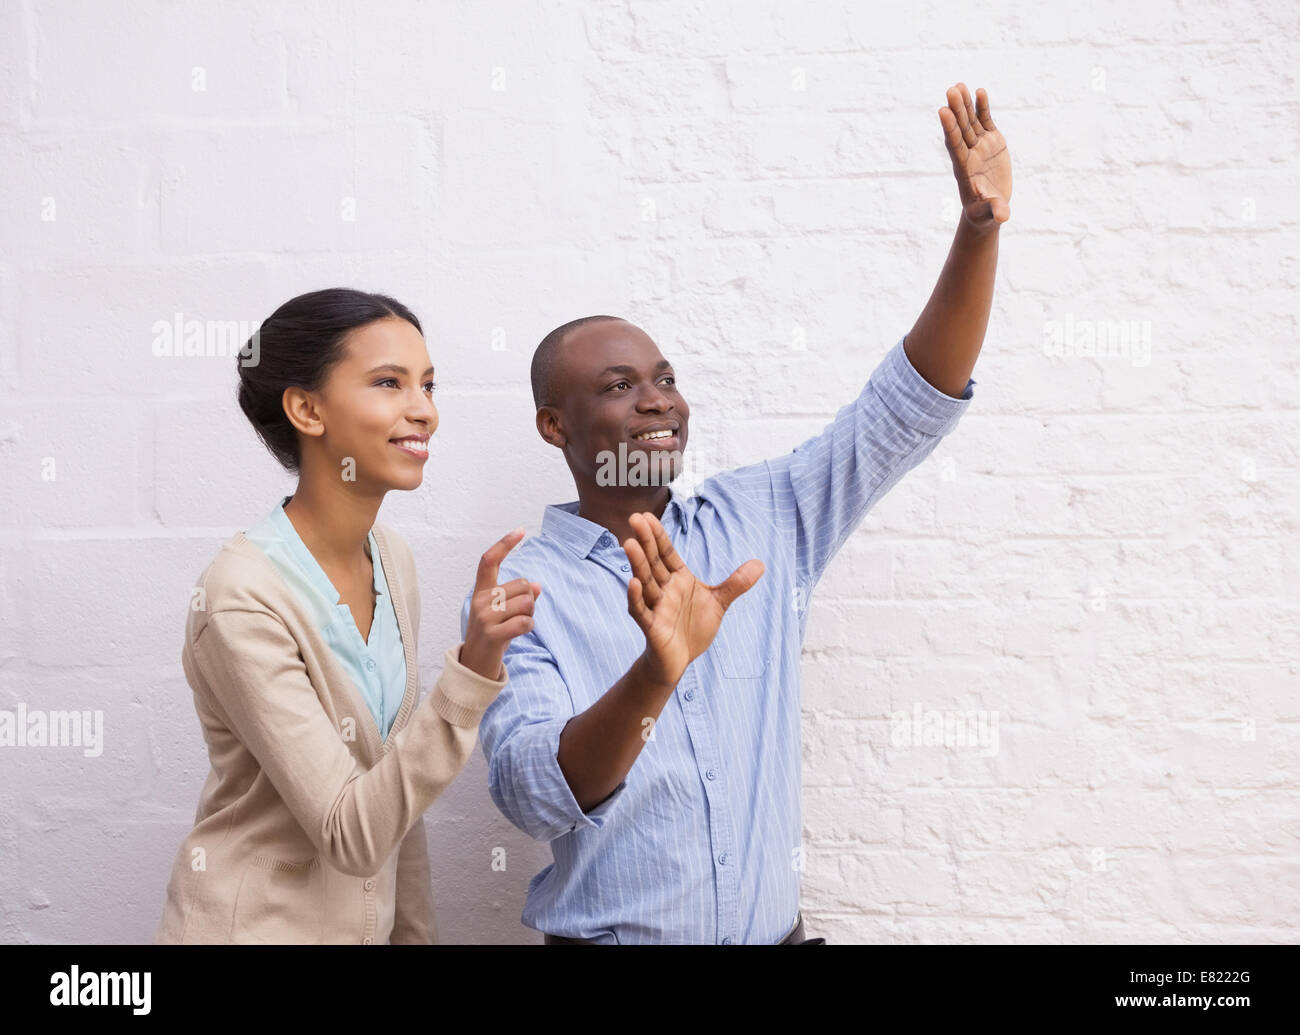 Businessman explains something to his colleague Stock Photo